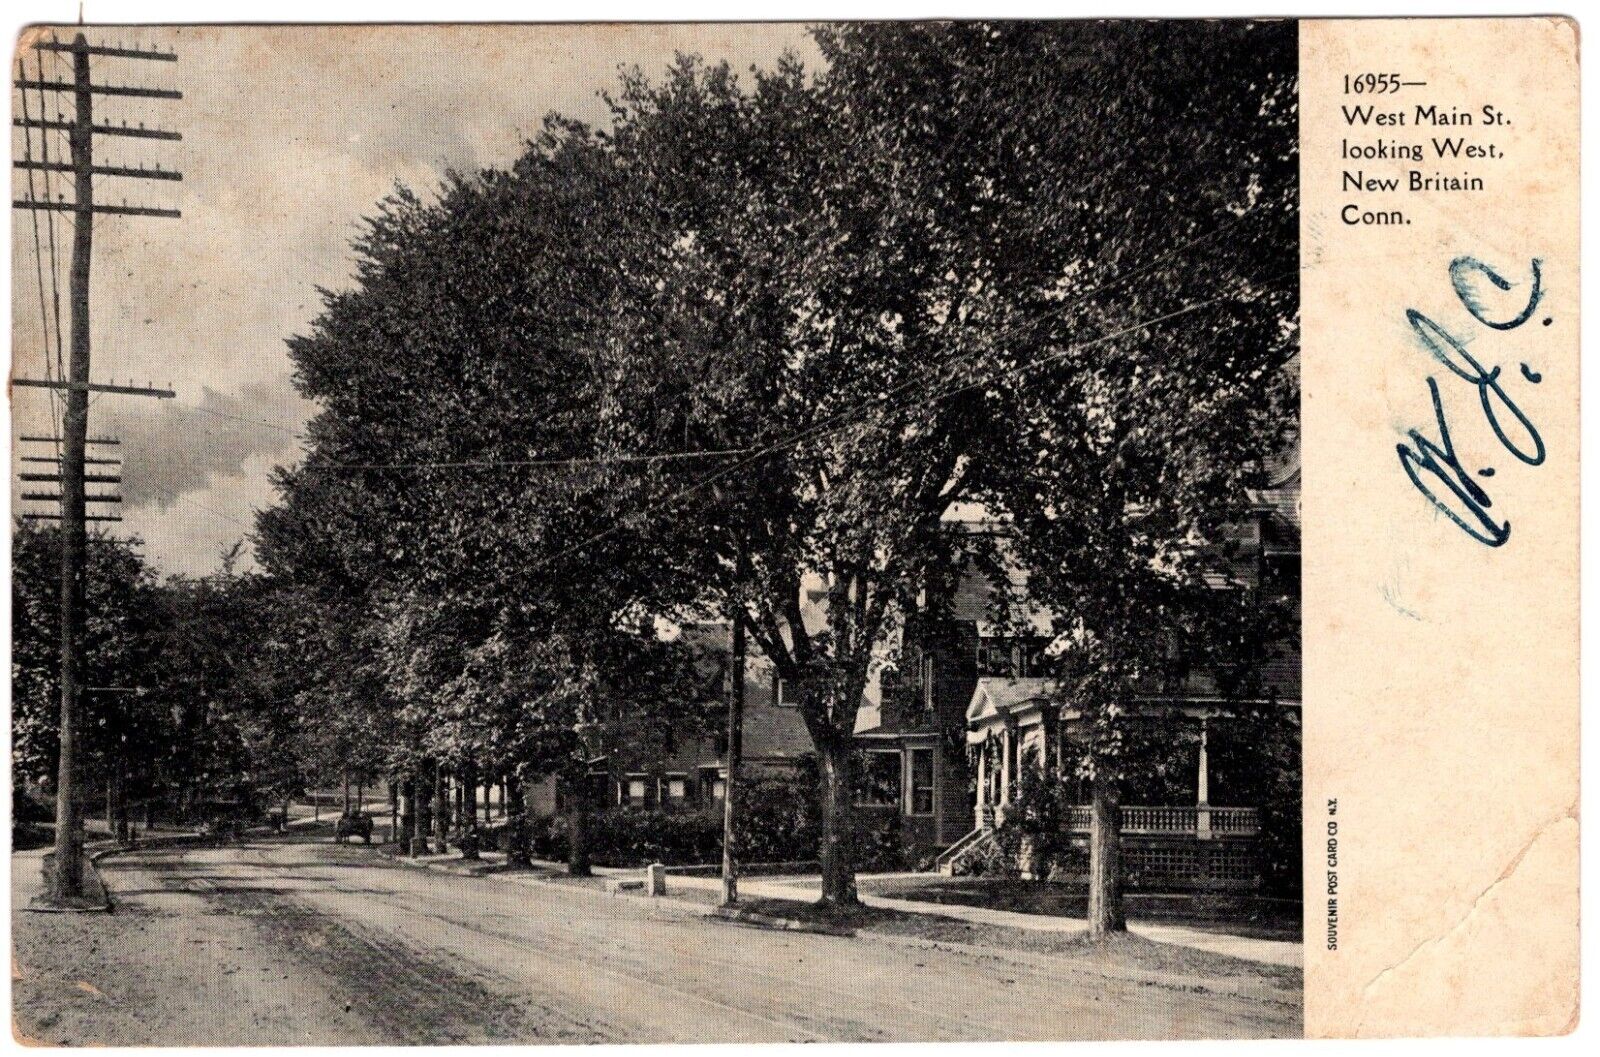 West Main St. looking West, New Britain, CONN. POST CARD. C. 1910's